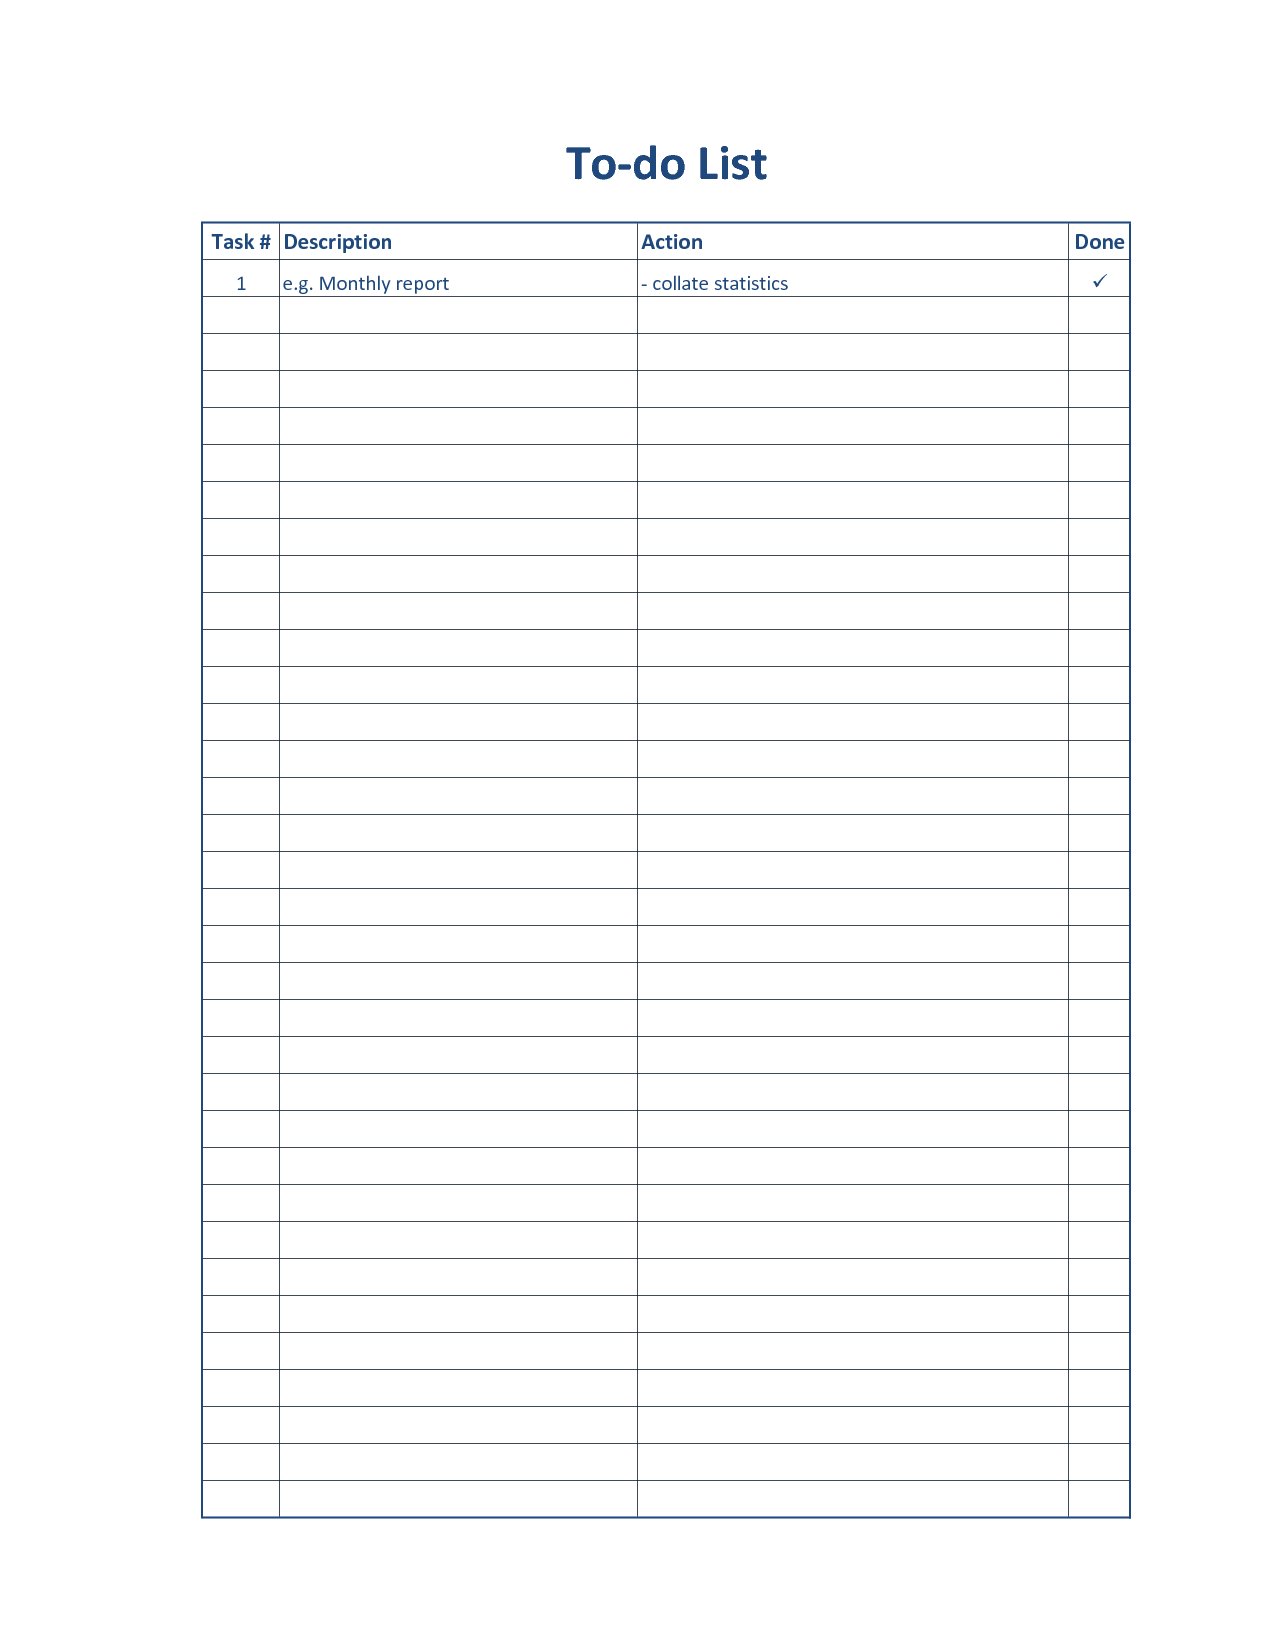 Template Printable Images Gallery Category Page 48 - printablee.com